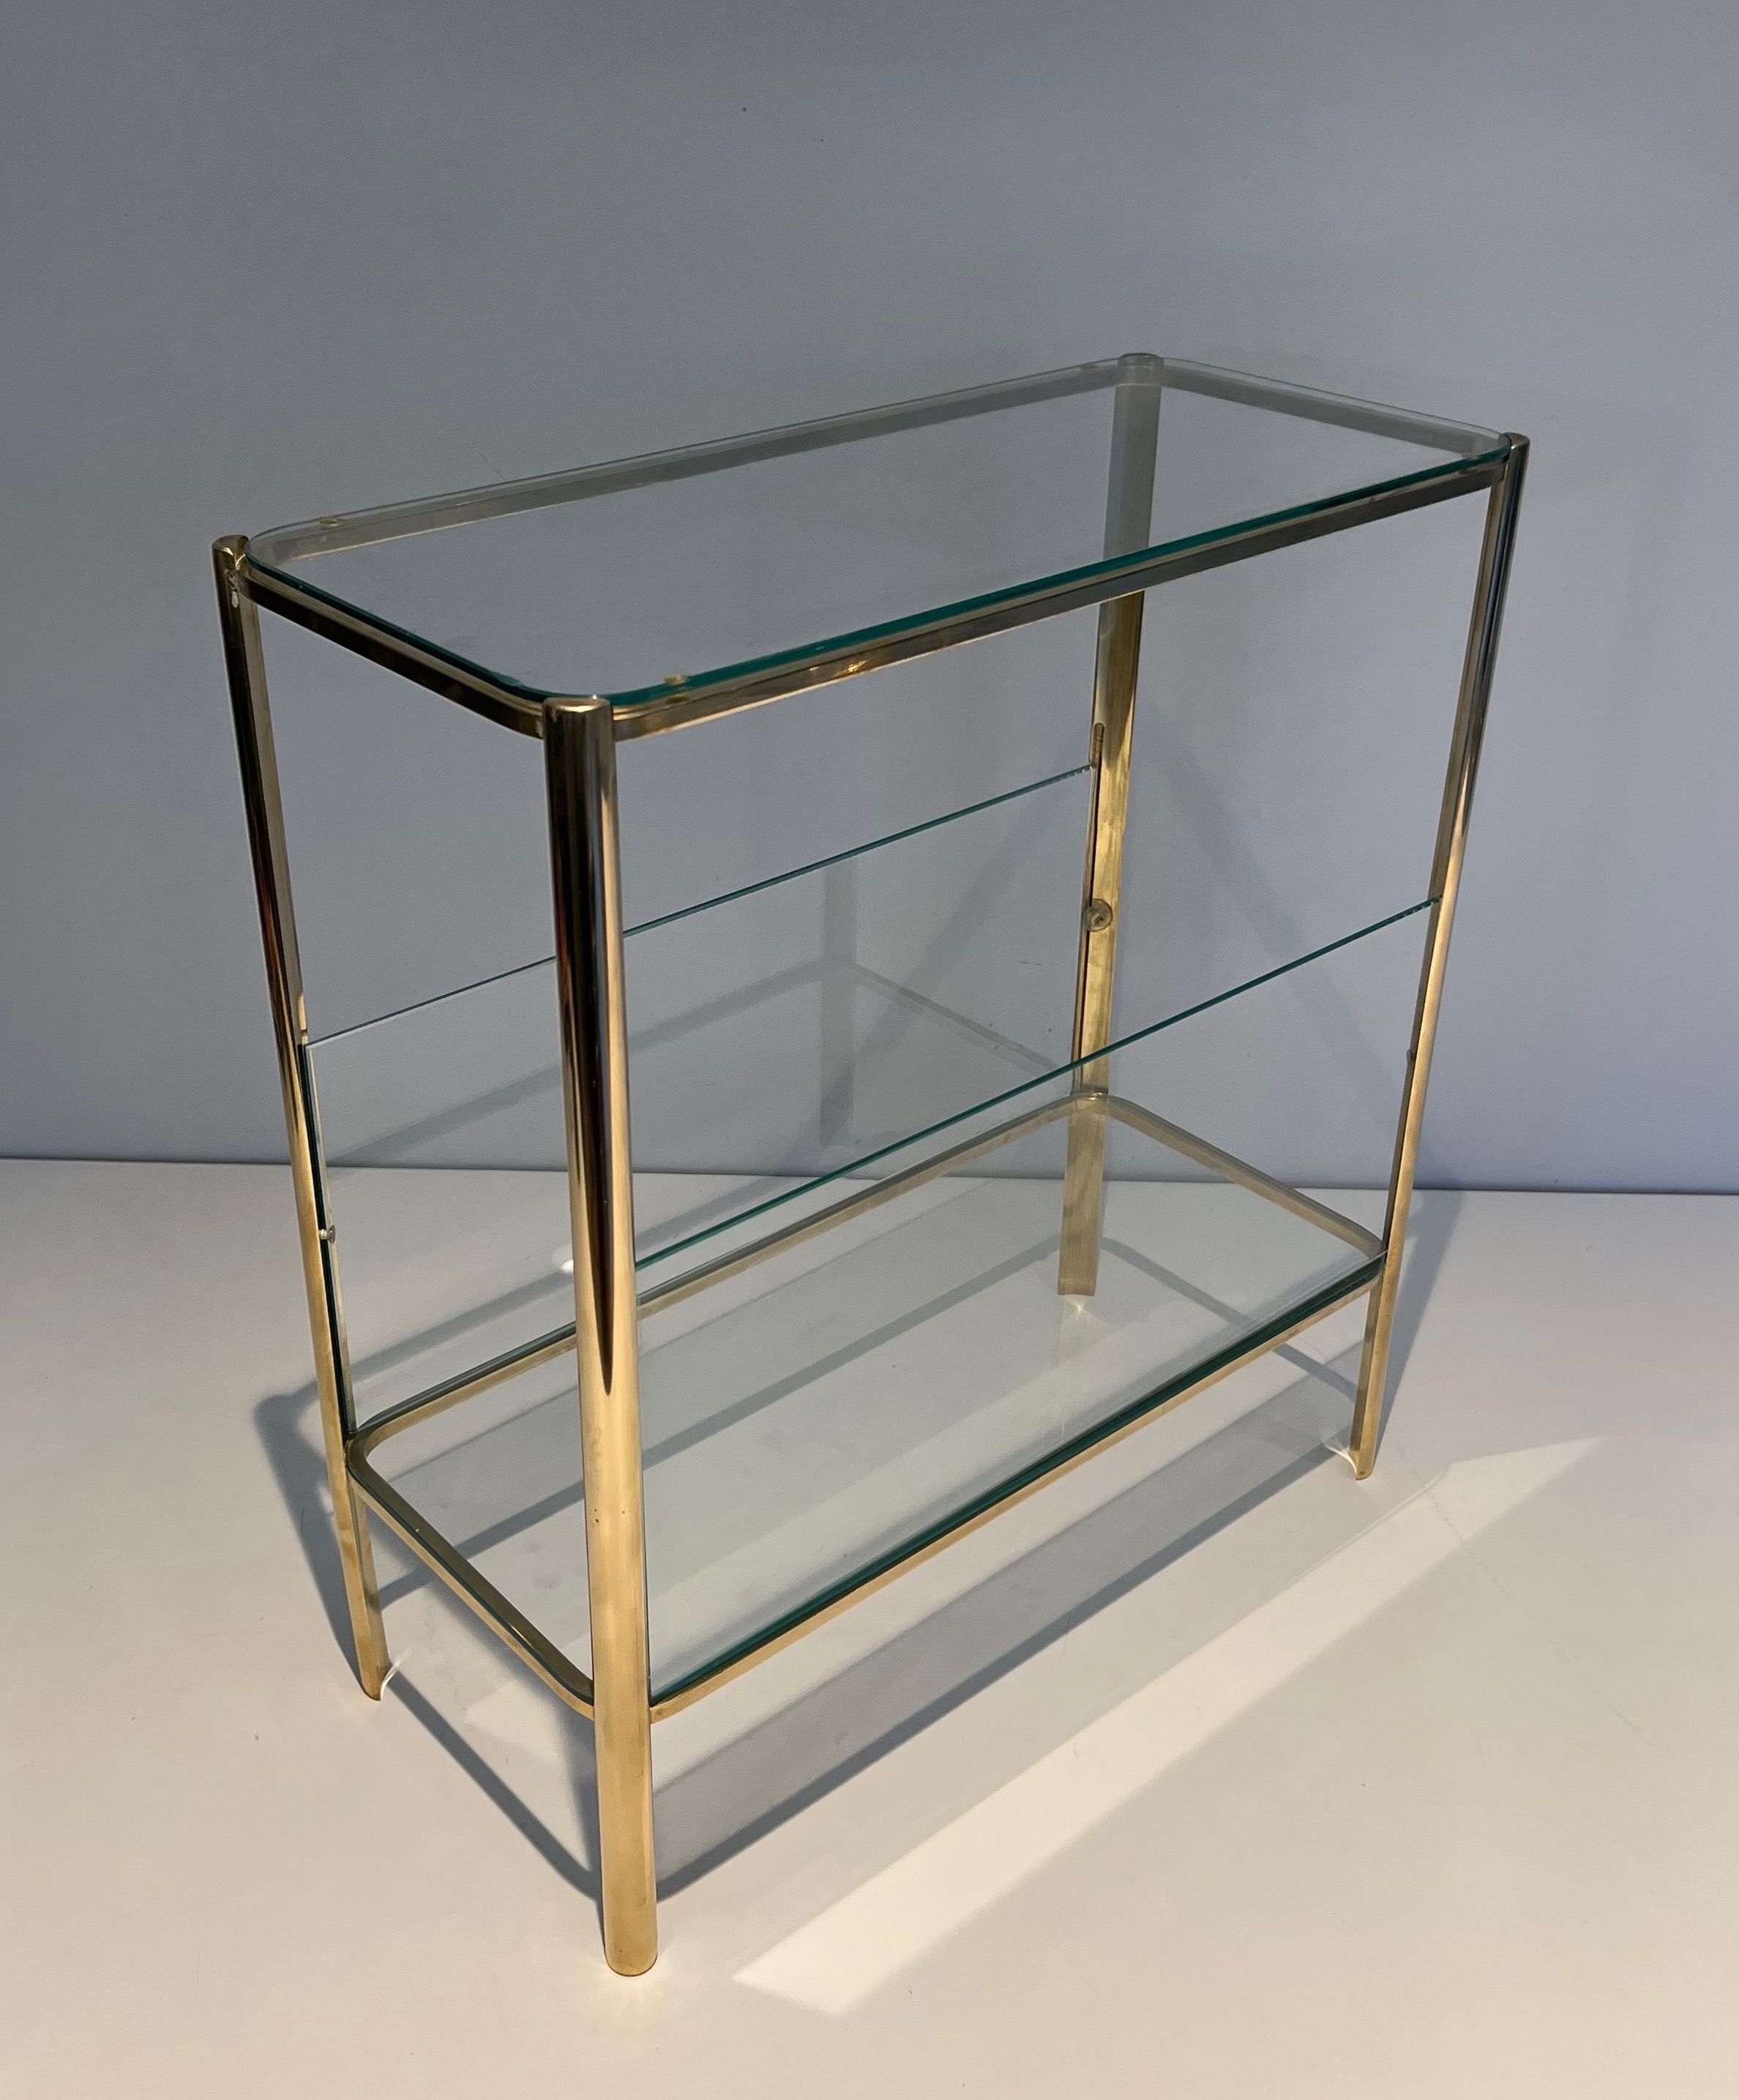 Bronze and Glass Magazine Rack Signed Jacques Théophile Lepelletier and Stamped by Broncz